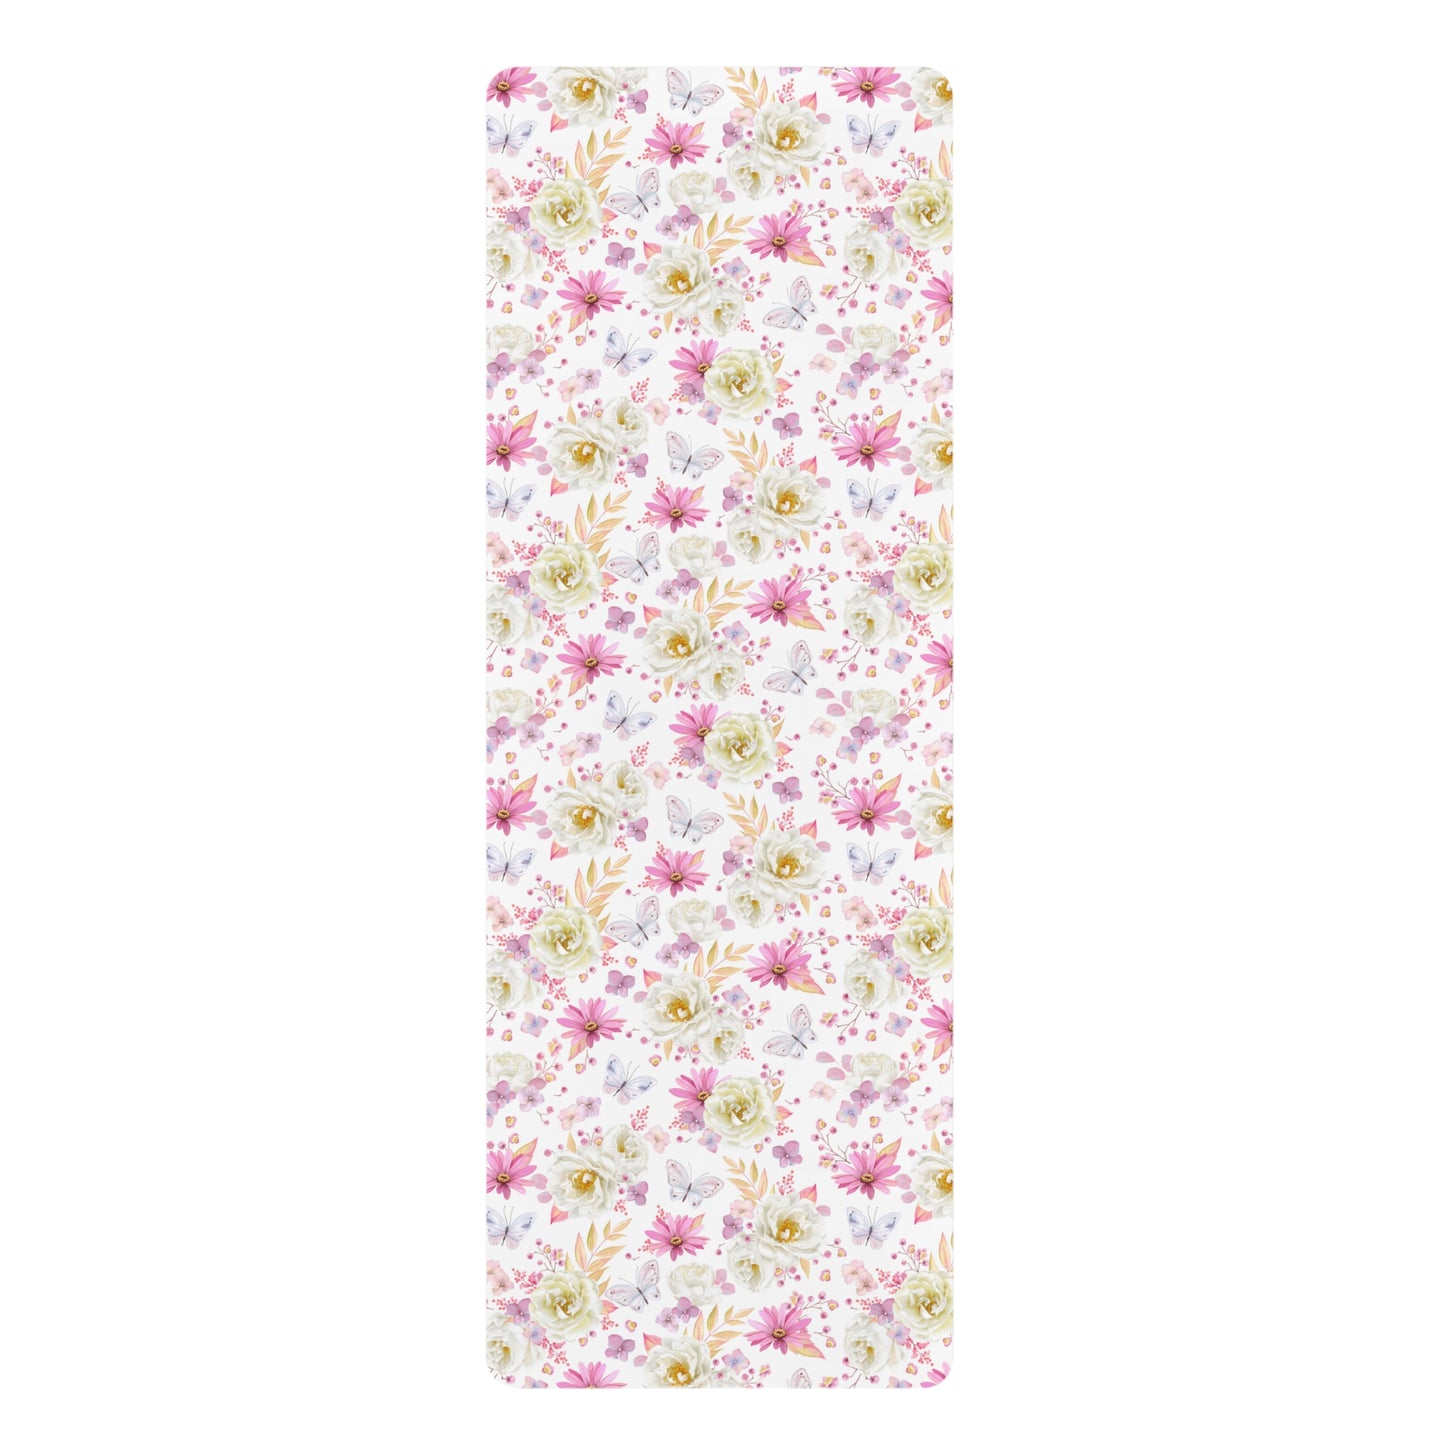 Spring Butterflies and Roses Rubber Yoga Mat